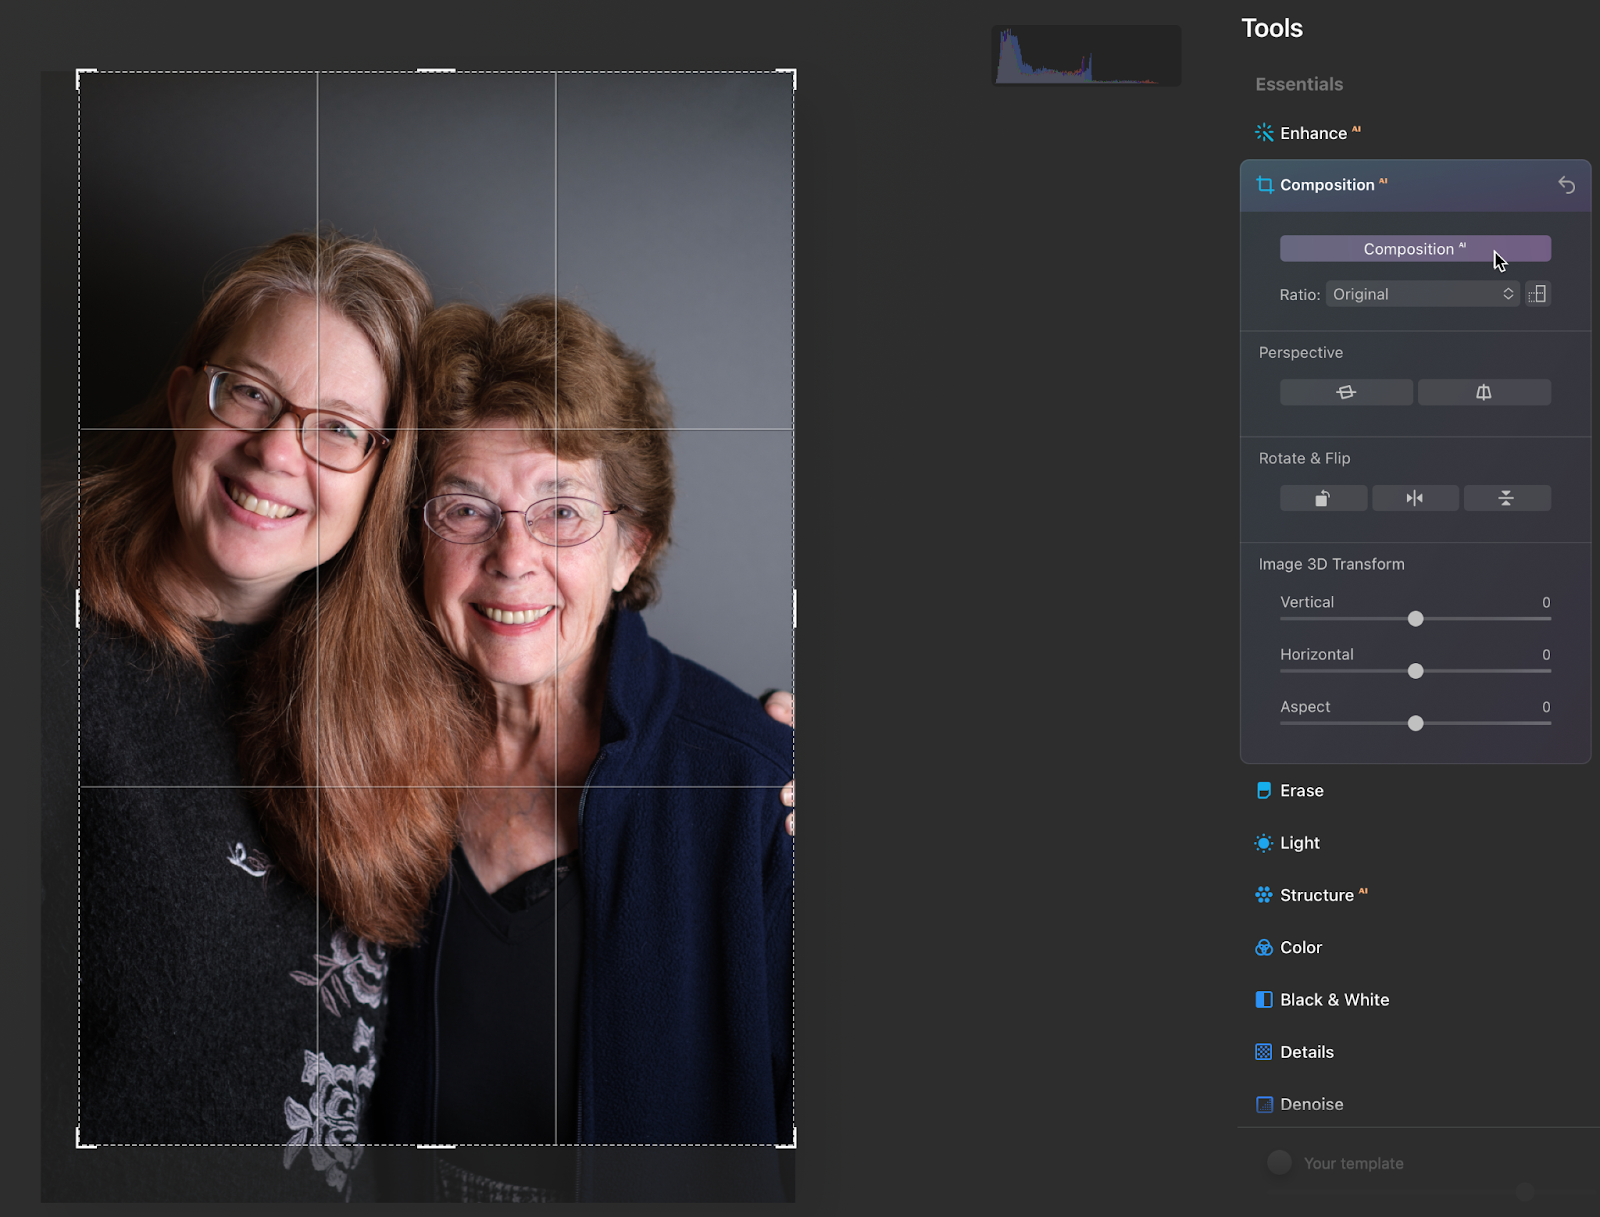 Luminar AI appears to have emphasized each face along the rule of thirds guides, but kept the distracting fingers to the right.